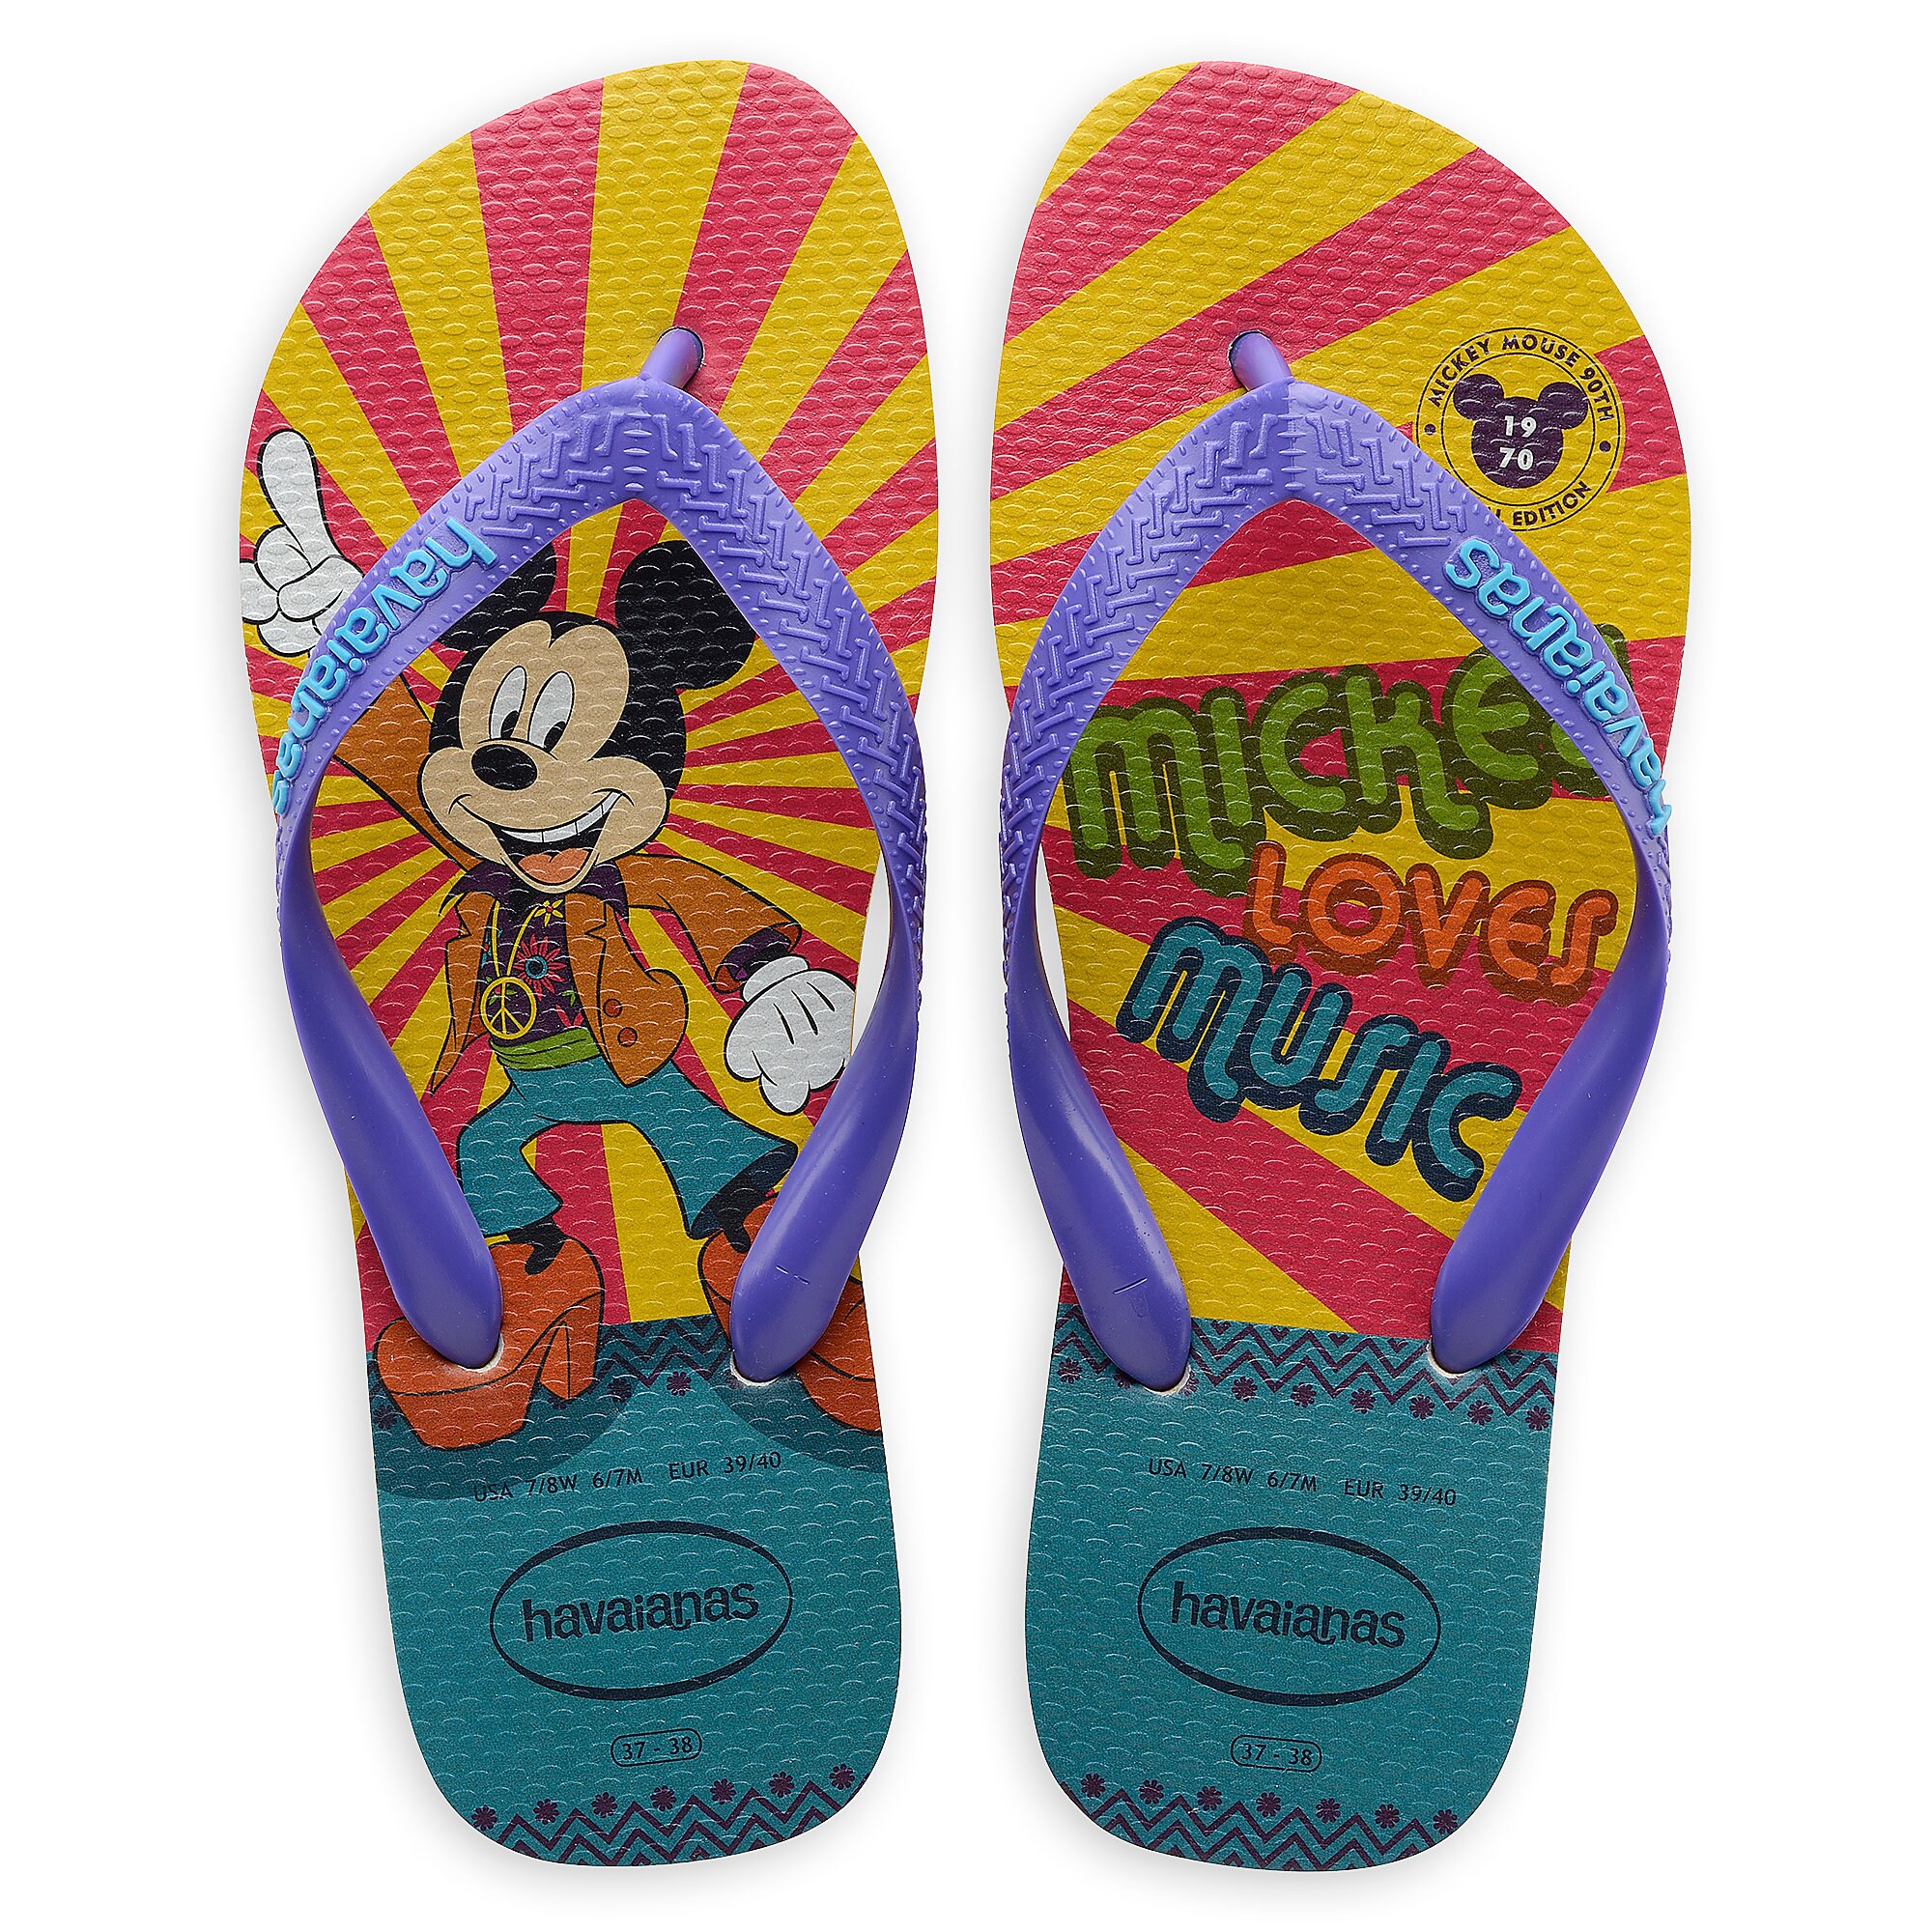  Mickey  Mouse  Disco Flip Flops for Adults by Havaianas  